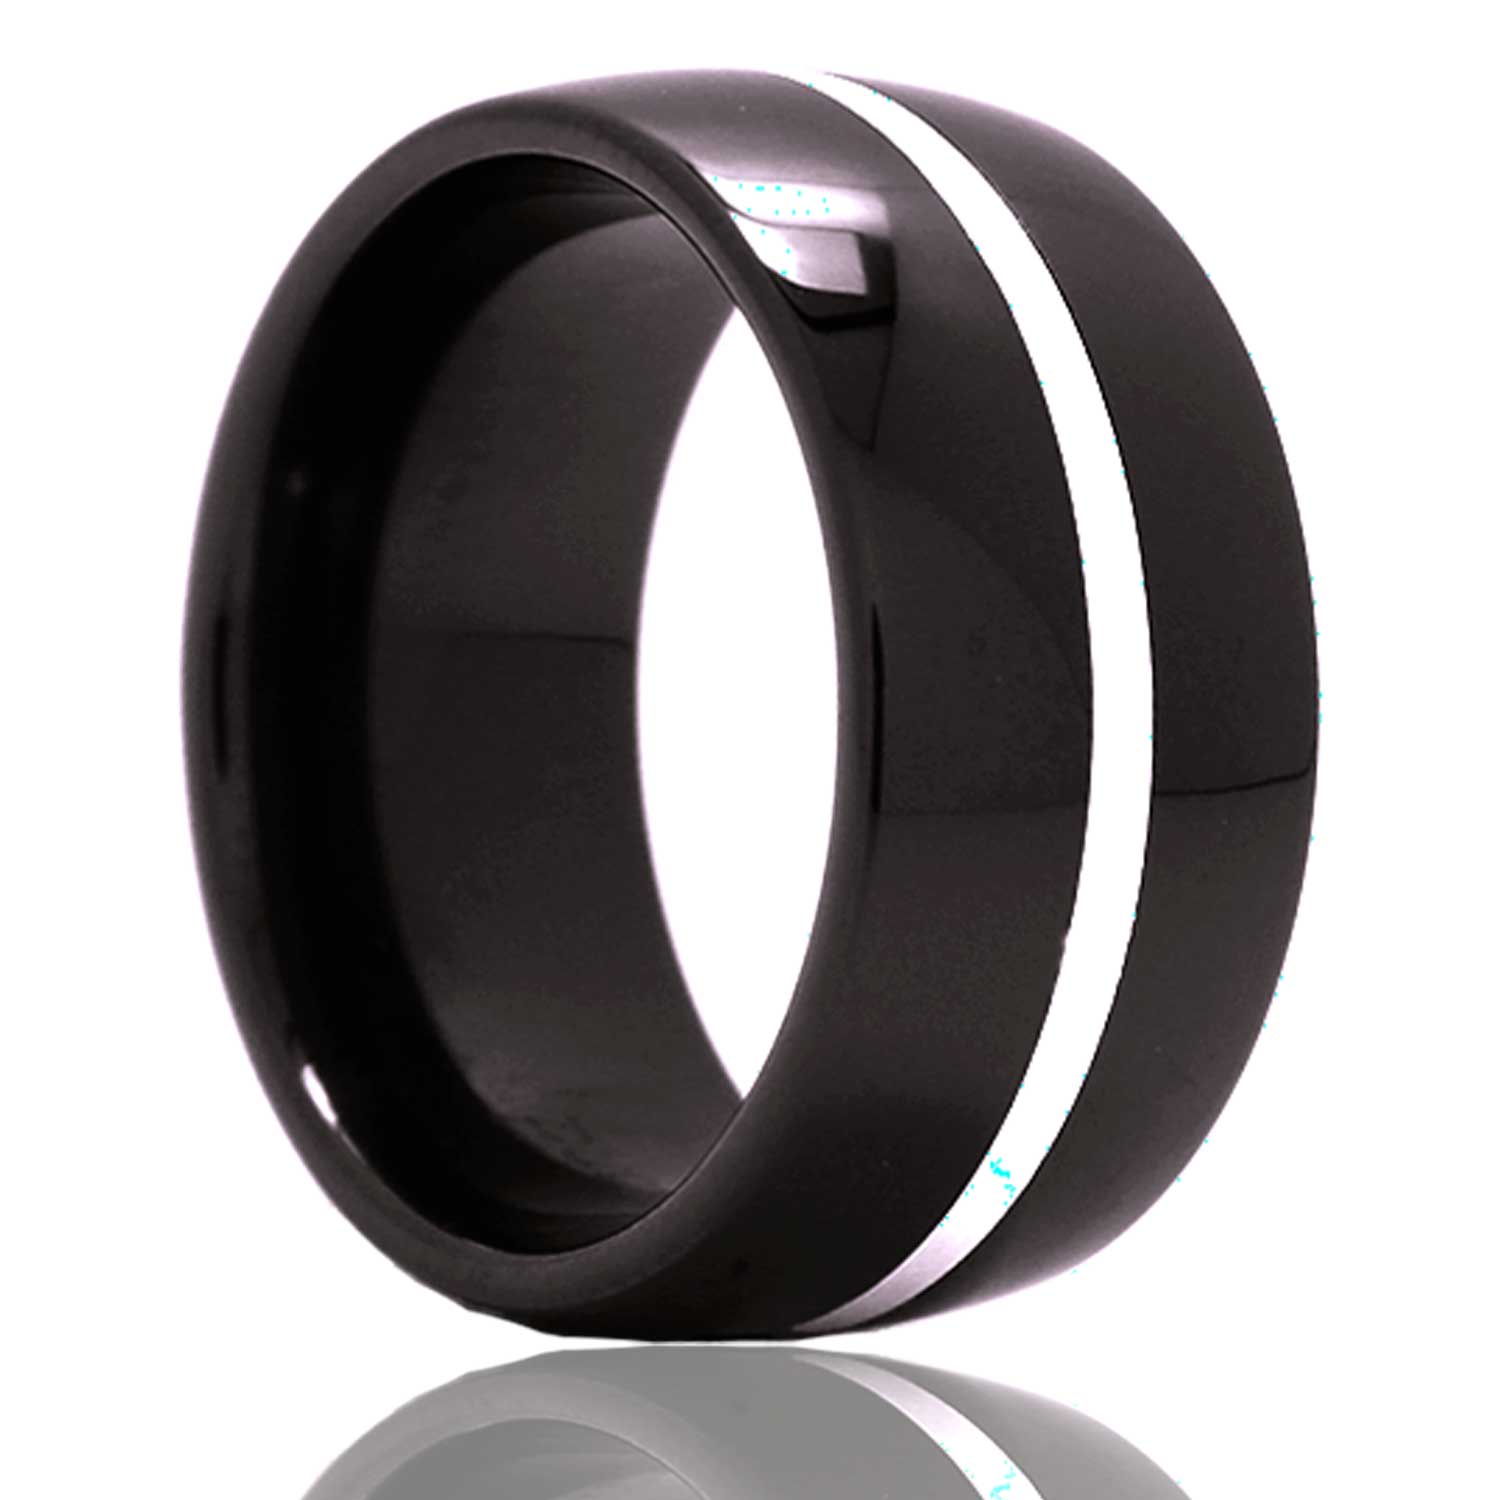 A argentium silver inlay domed black ceramic men's wedding band displayed on a neutral white background.